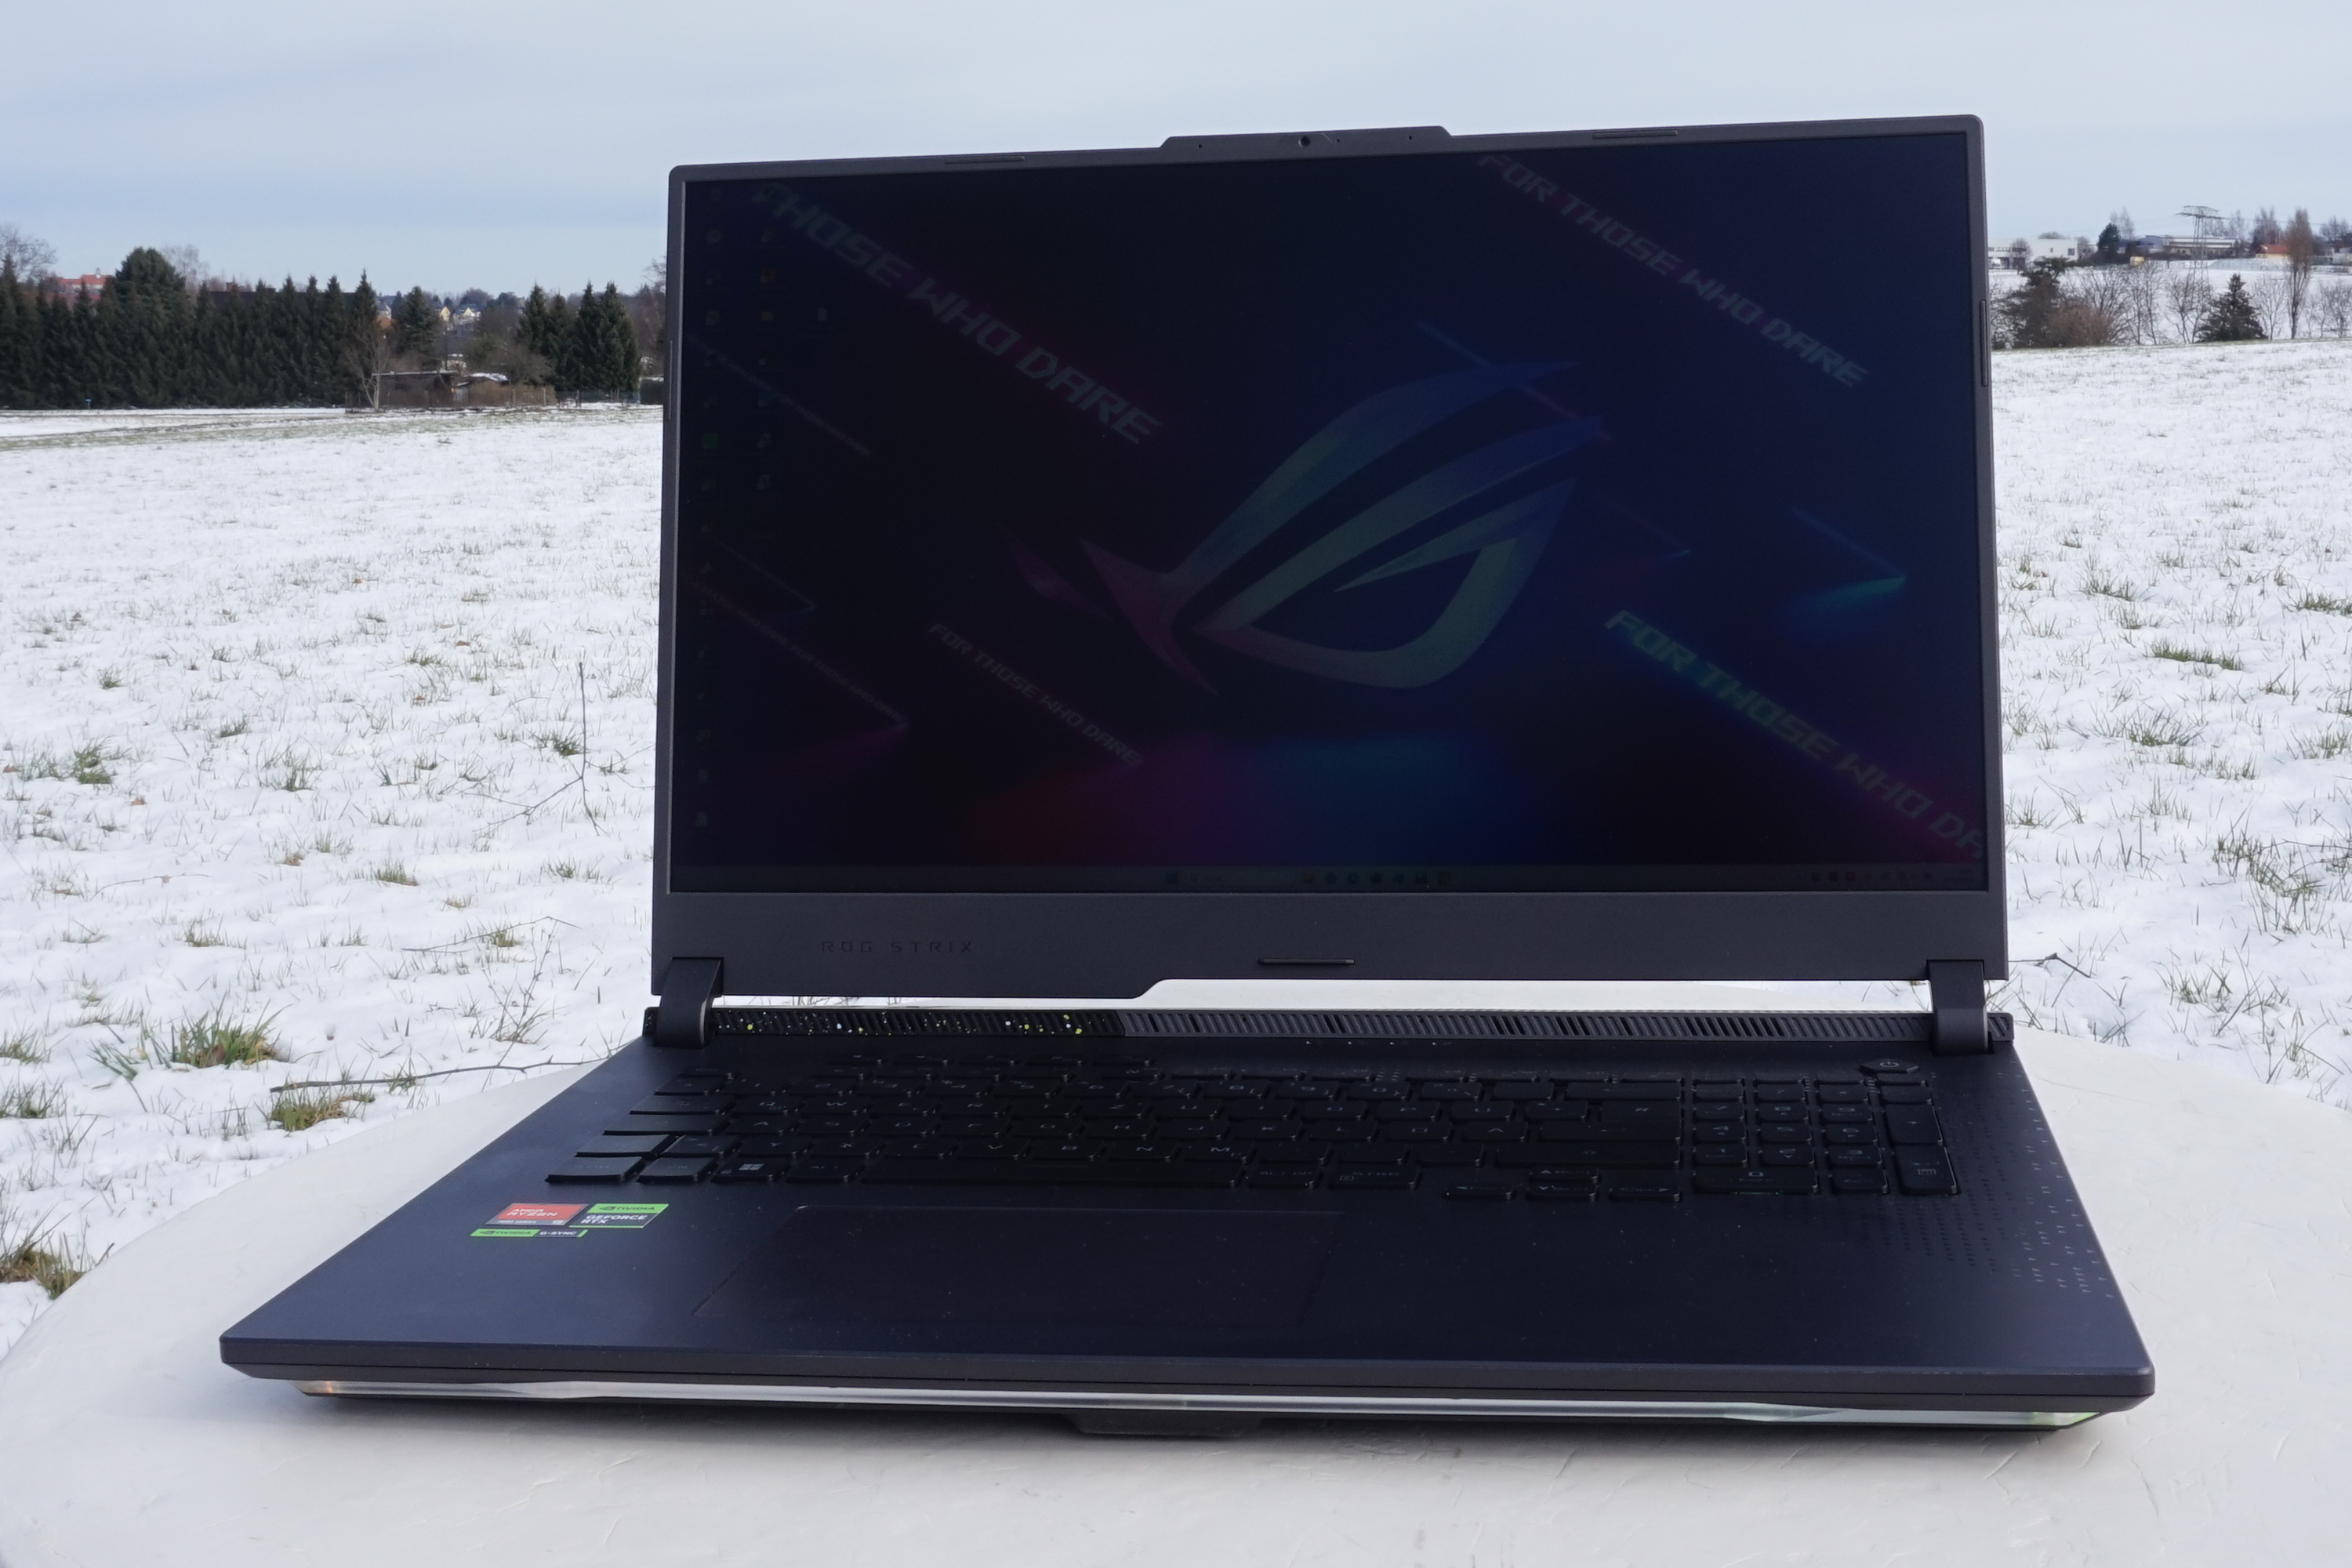 Asus ROG Strix G17 G713PI: Gaming laptop impresses in the test with the new Ryzen 9